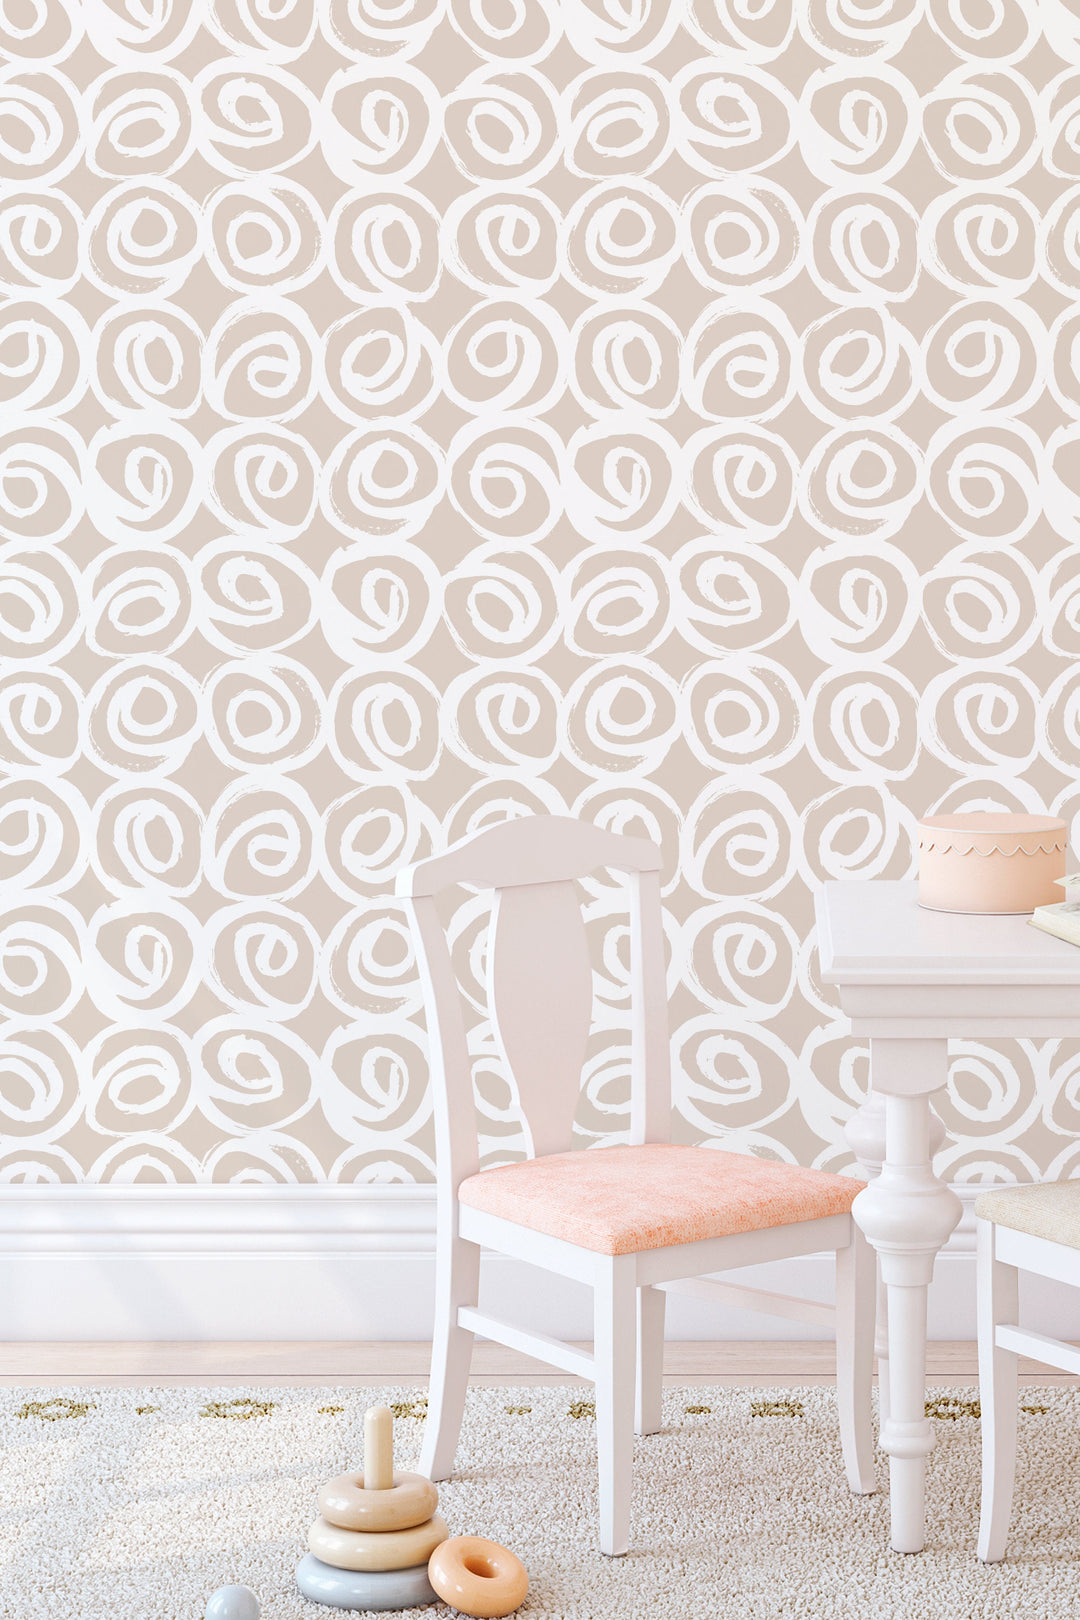 Boho design, spirals on beige background, abstract shapes  - Peel and stick wallpaper, Removable , traditional wallpaper - #53046 /1040